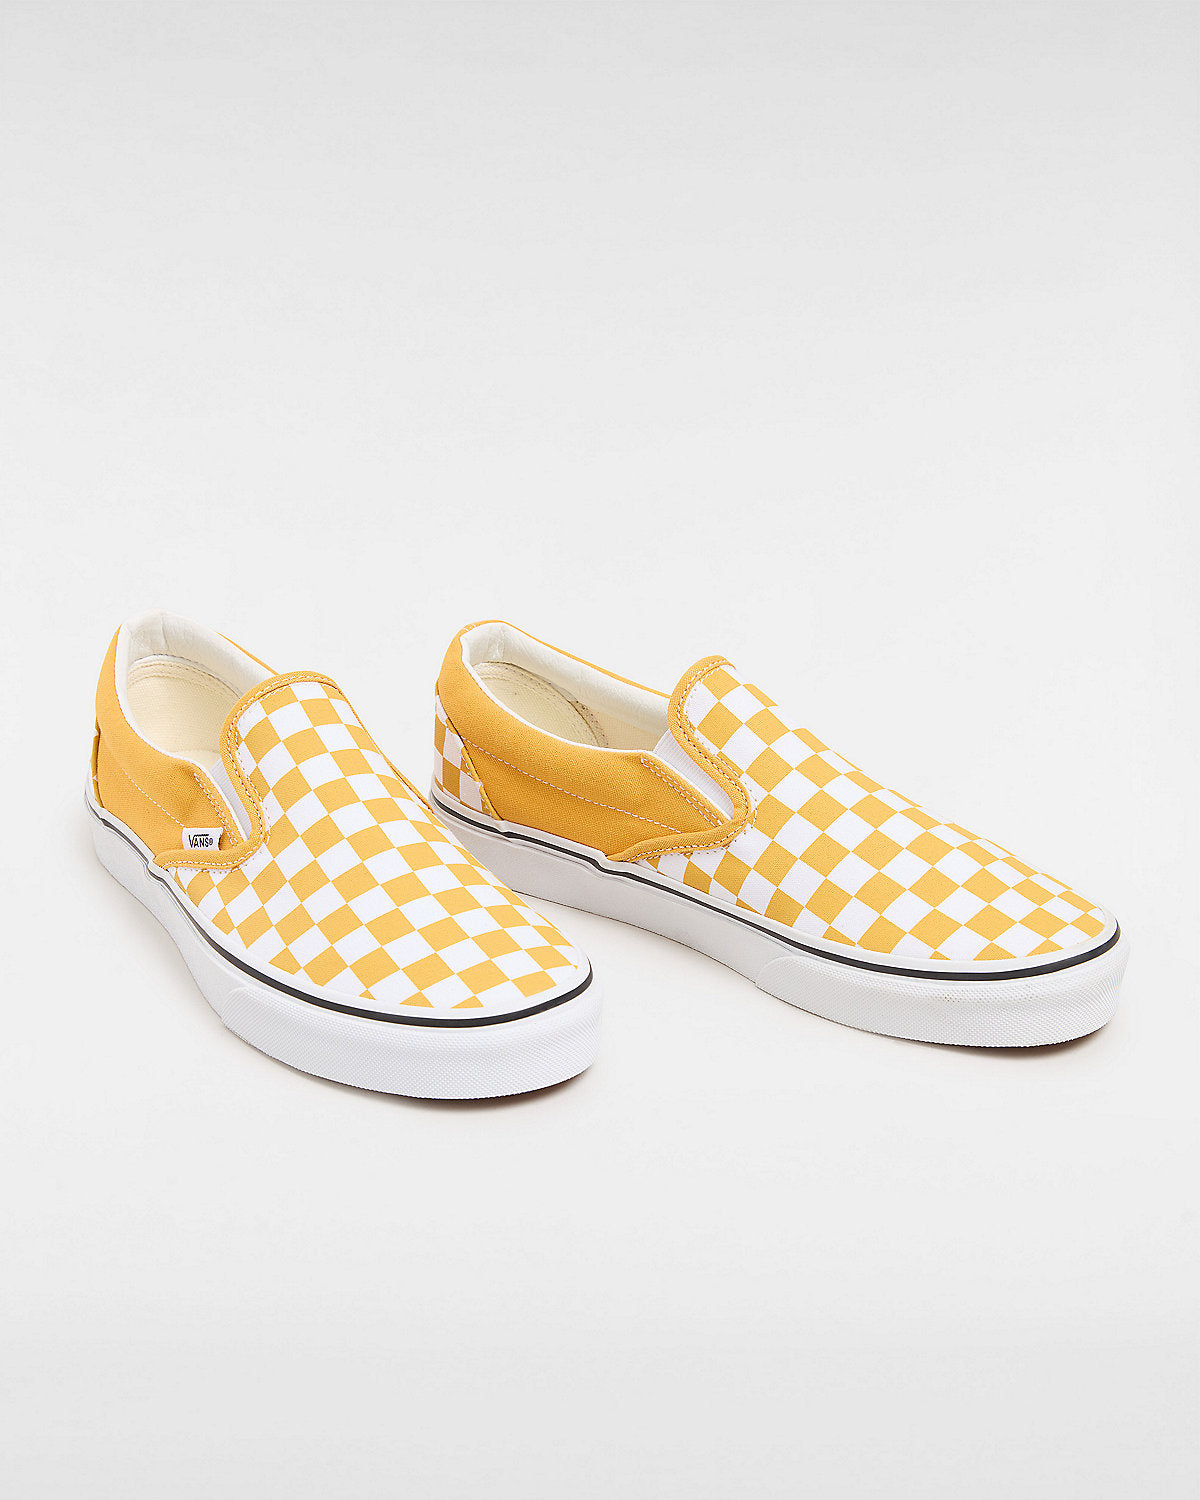 VANS Unisex Classic Slip-On Color Theory Checkerboard Trainers - Golden Glow